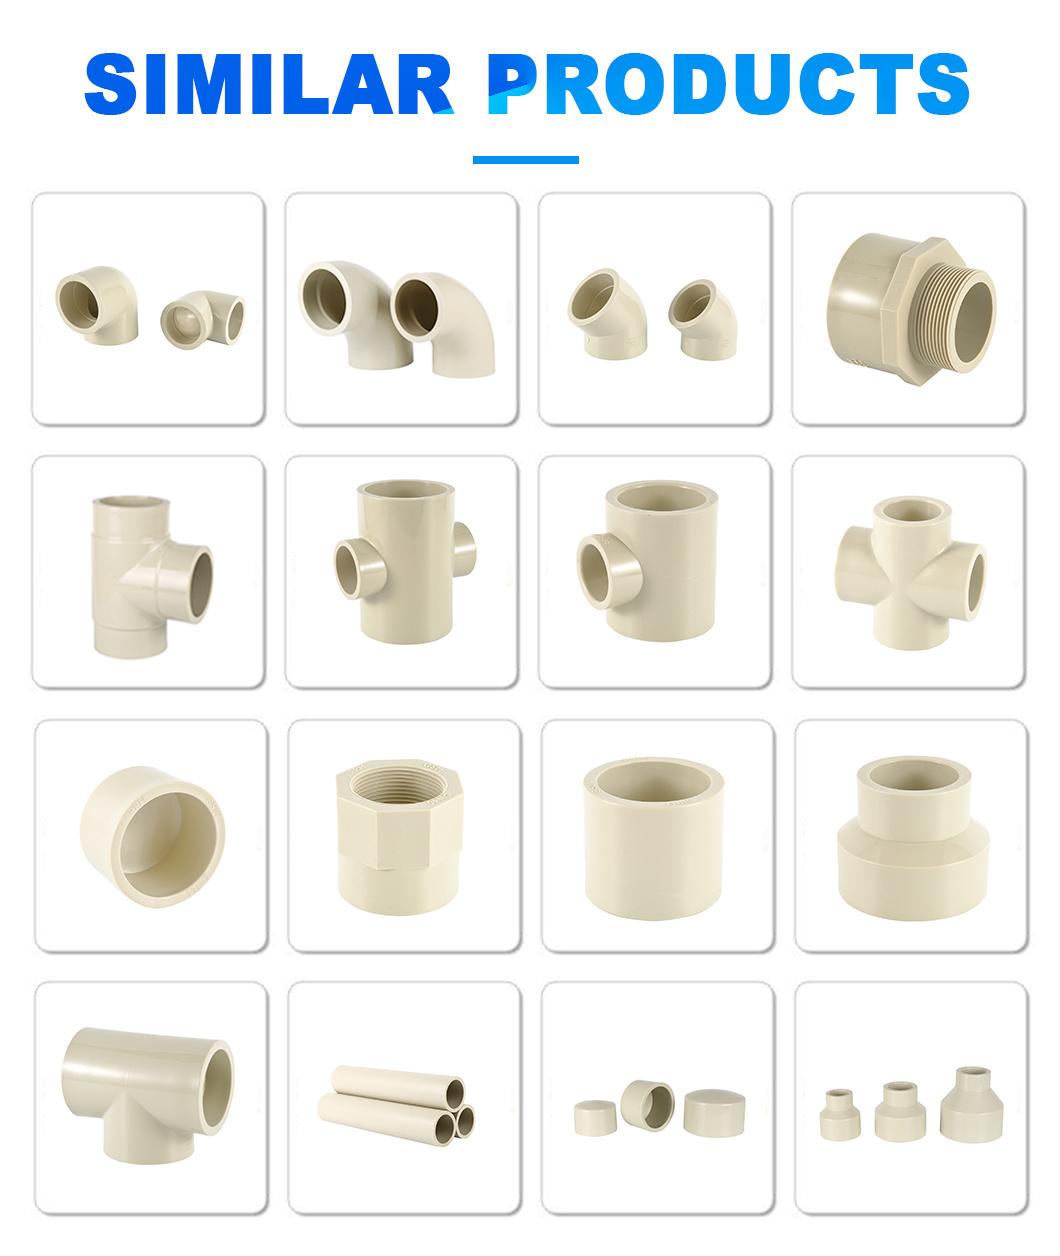 High Quality Pph Pipe Fittings According to DIN ANSI Standard Van Stone Flange